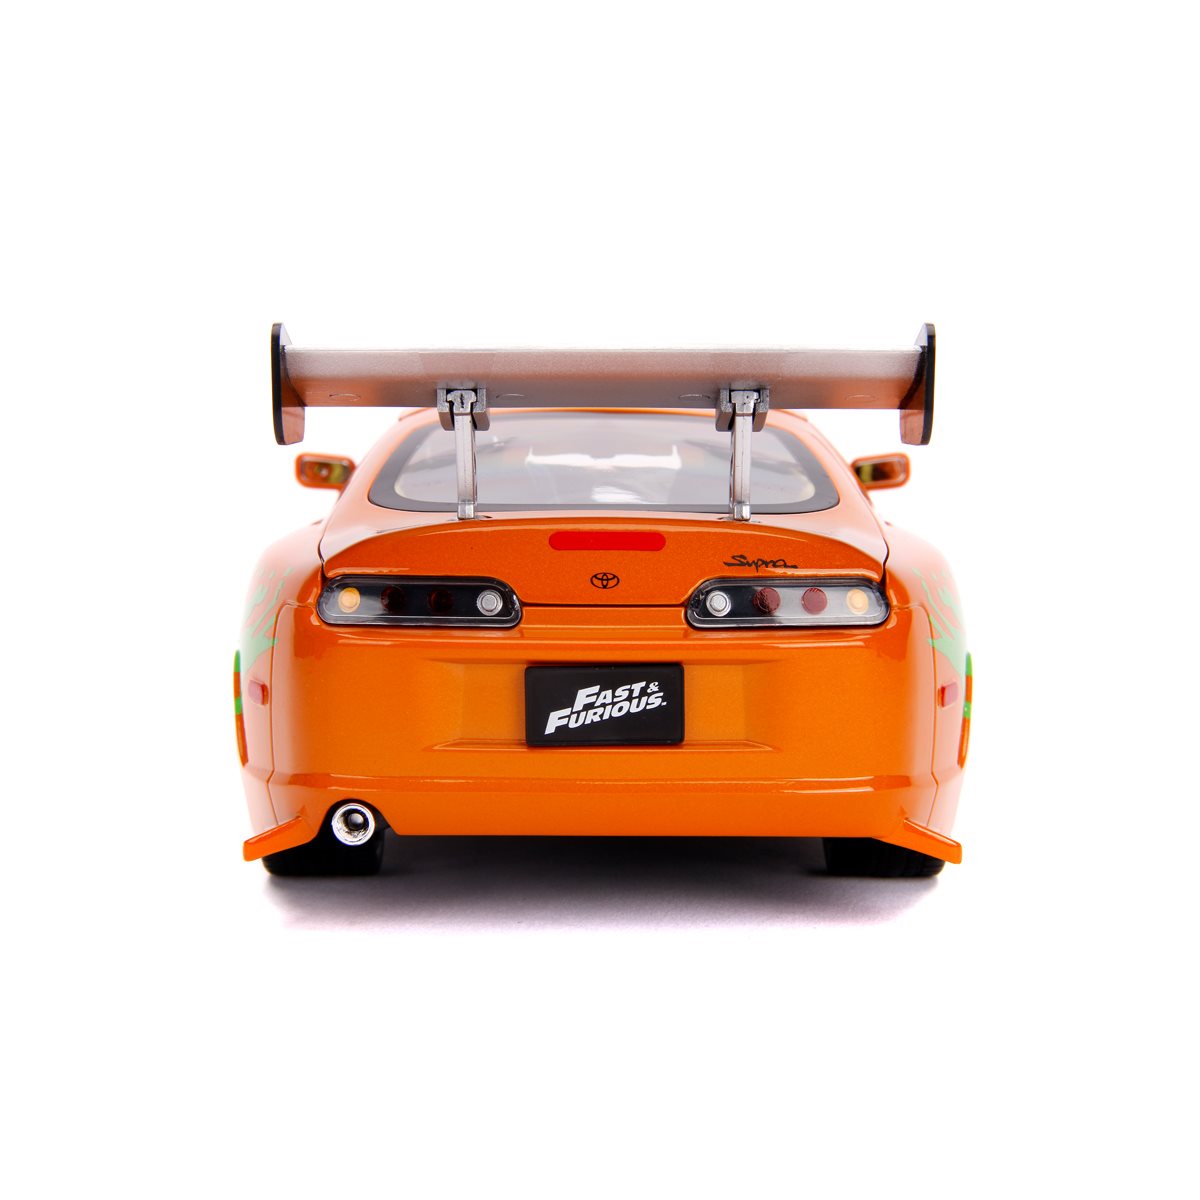 DIECAST MODEL fast and furious Brian's Toyota Supra KEYRINGS GREAT GIFTS. 